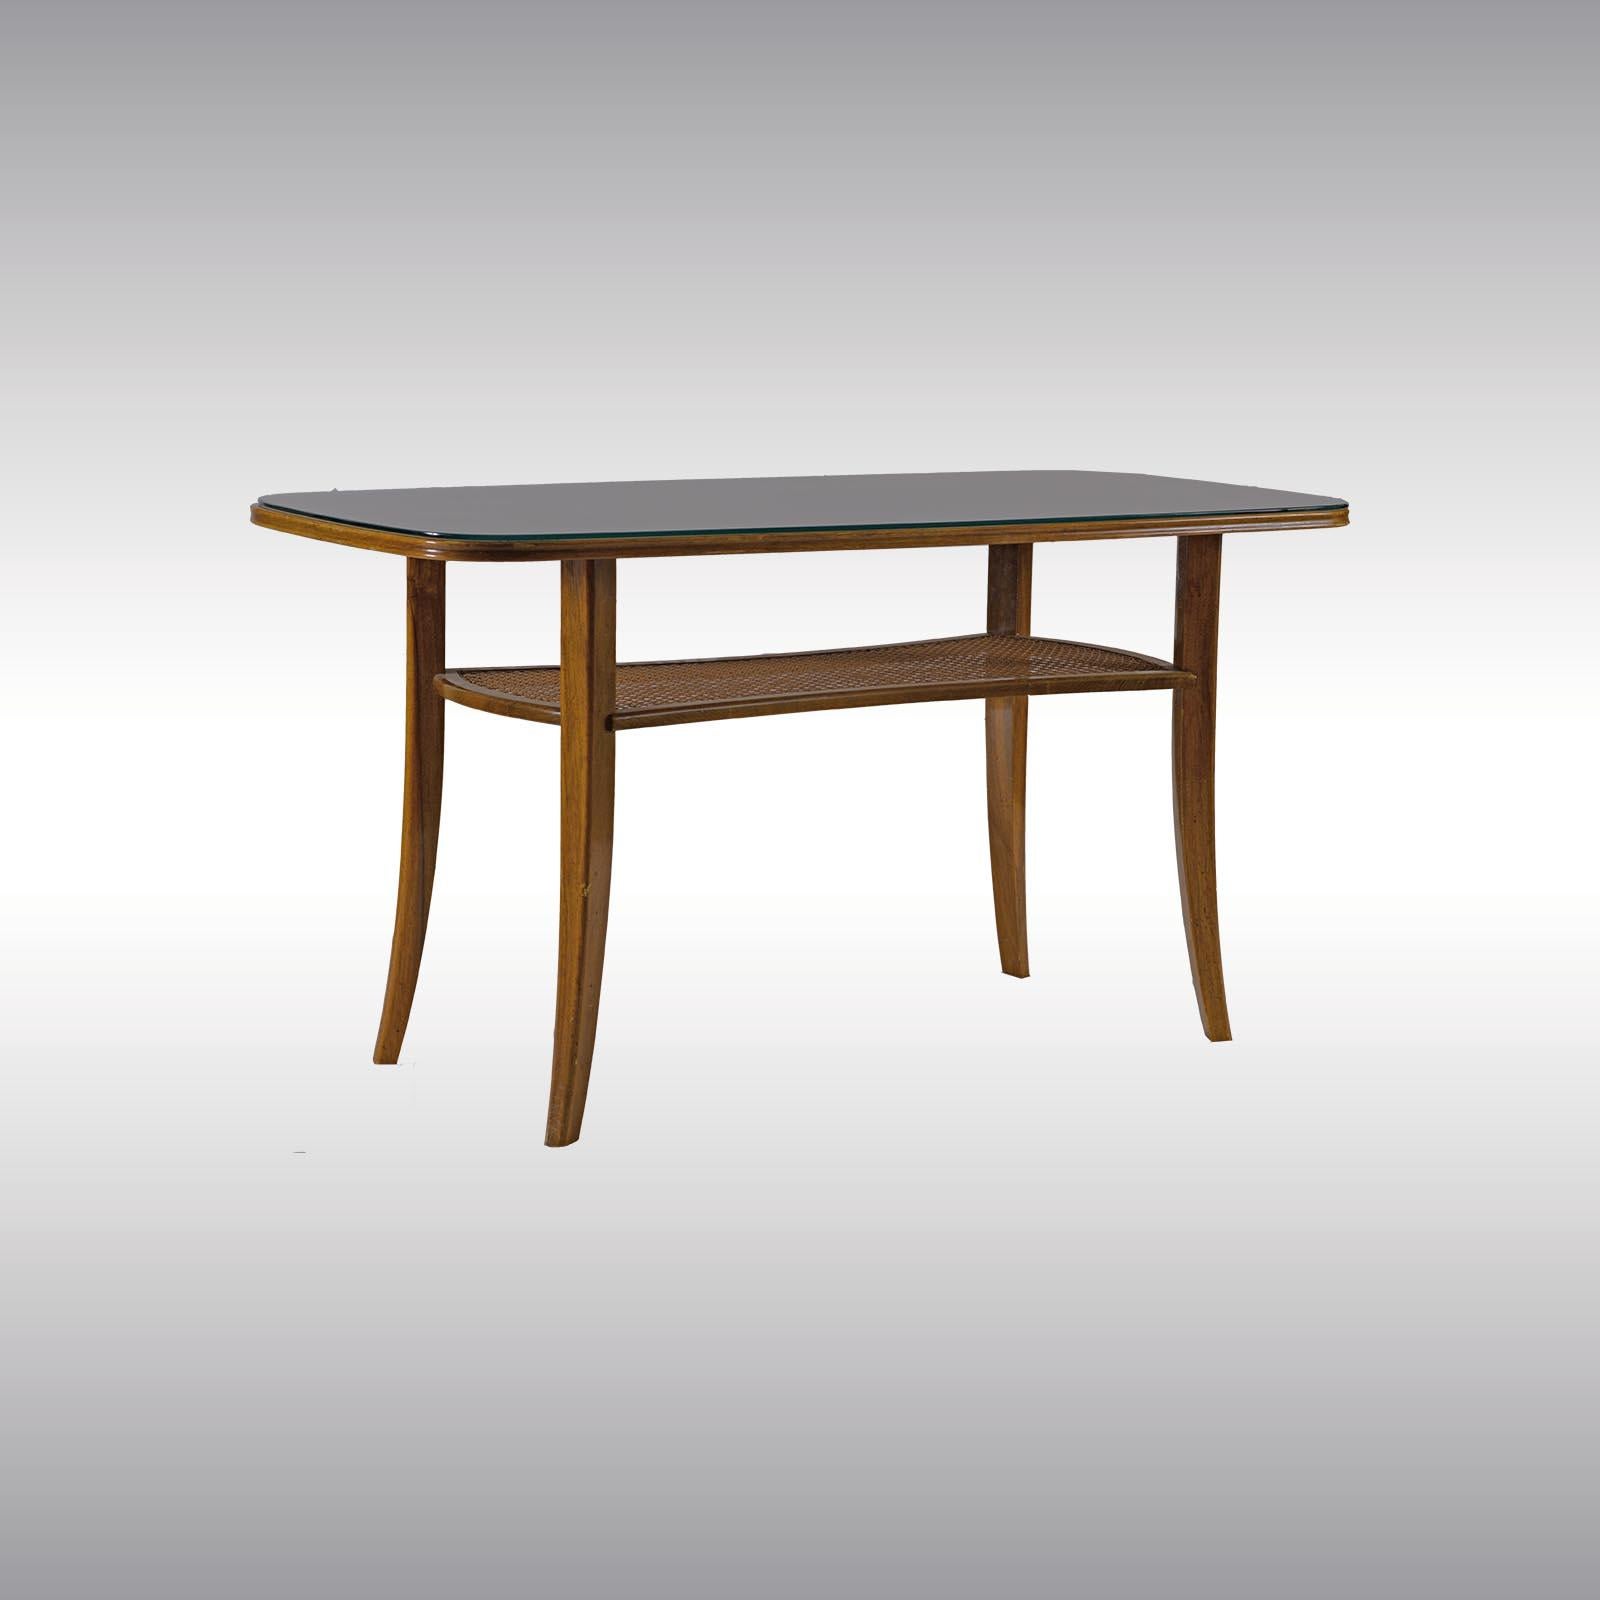 Hand-Crafted Josef Frank and Svensk Tenn Attributed Table Original Mid-Century Modern, 1940 For Sale